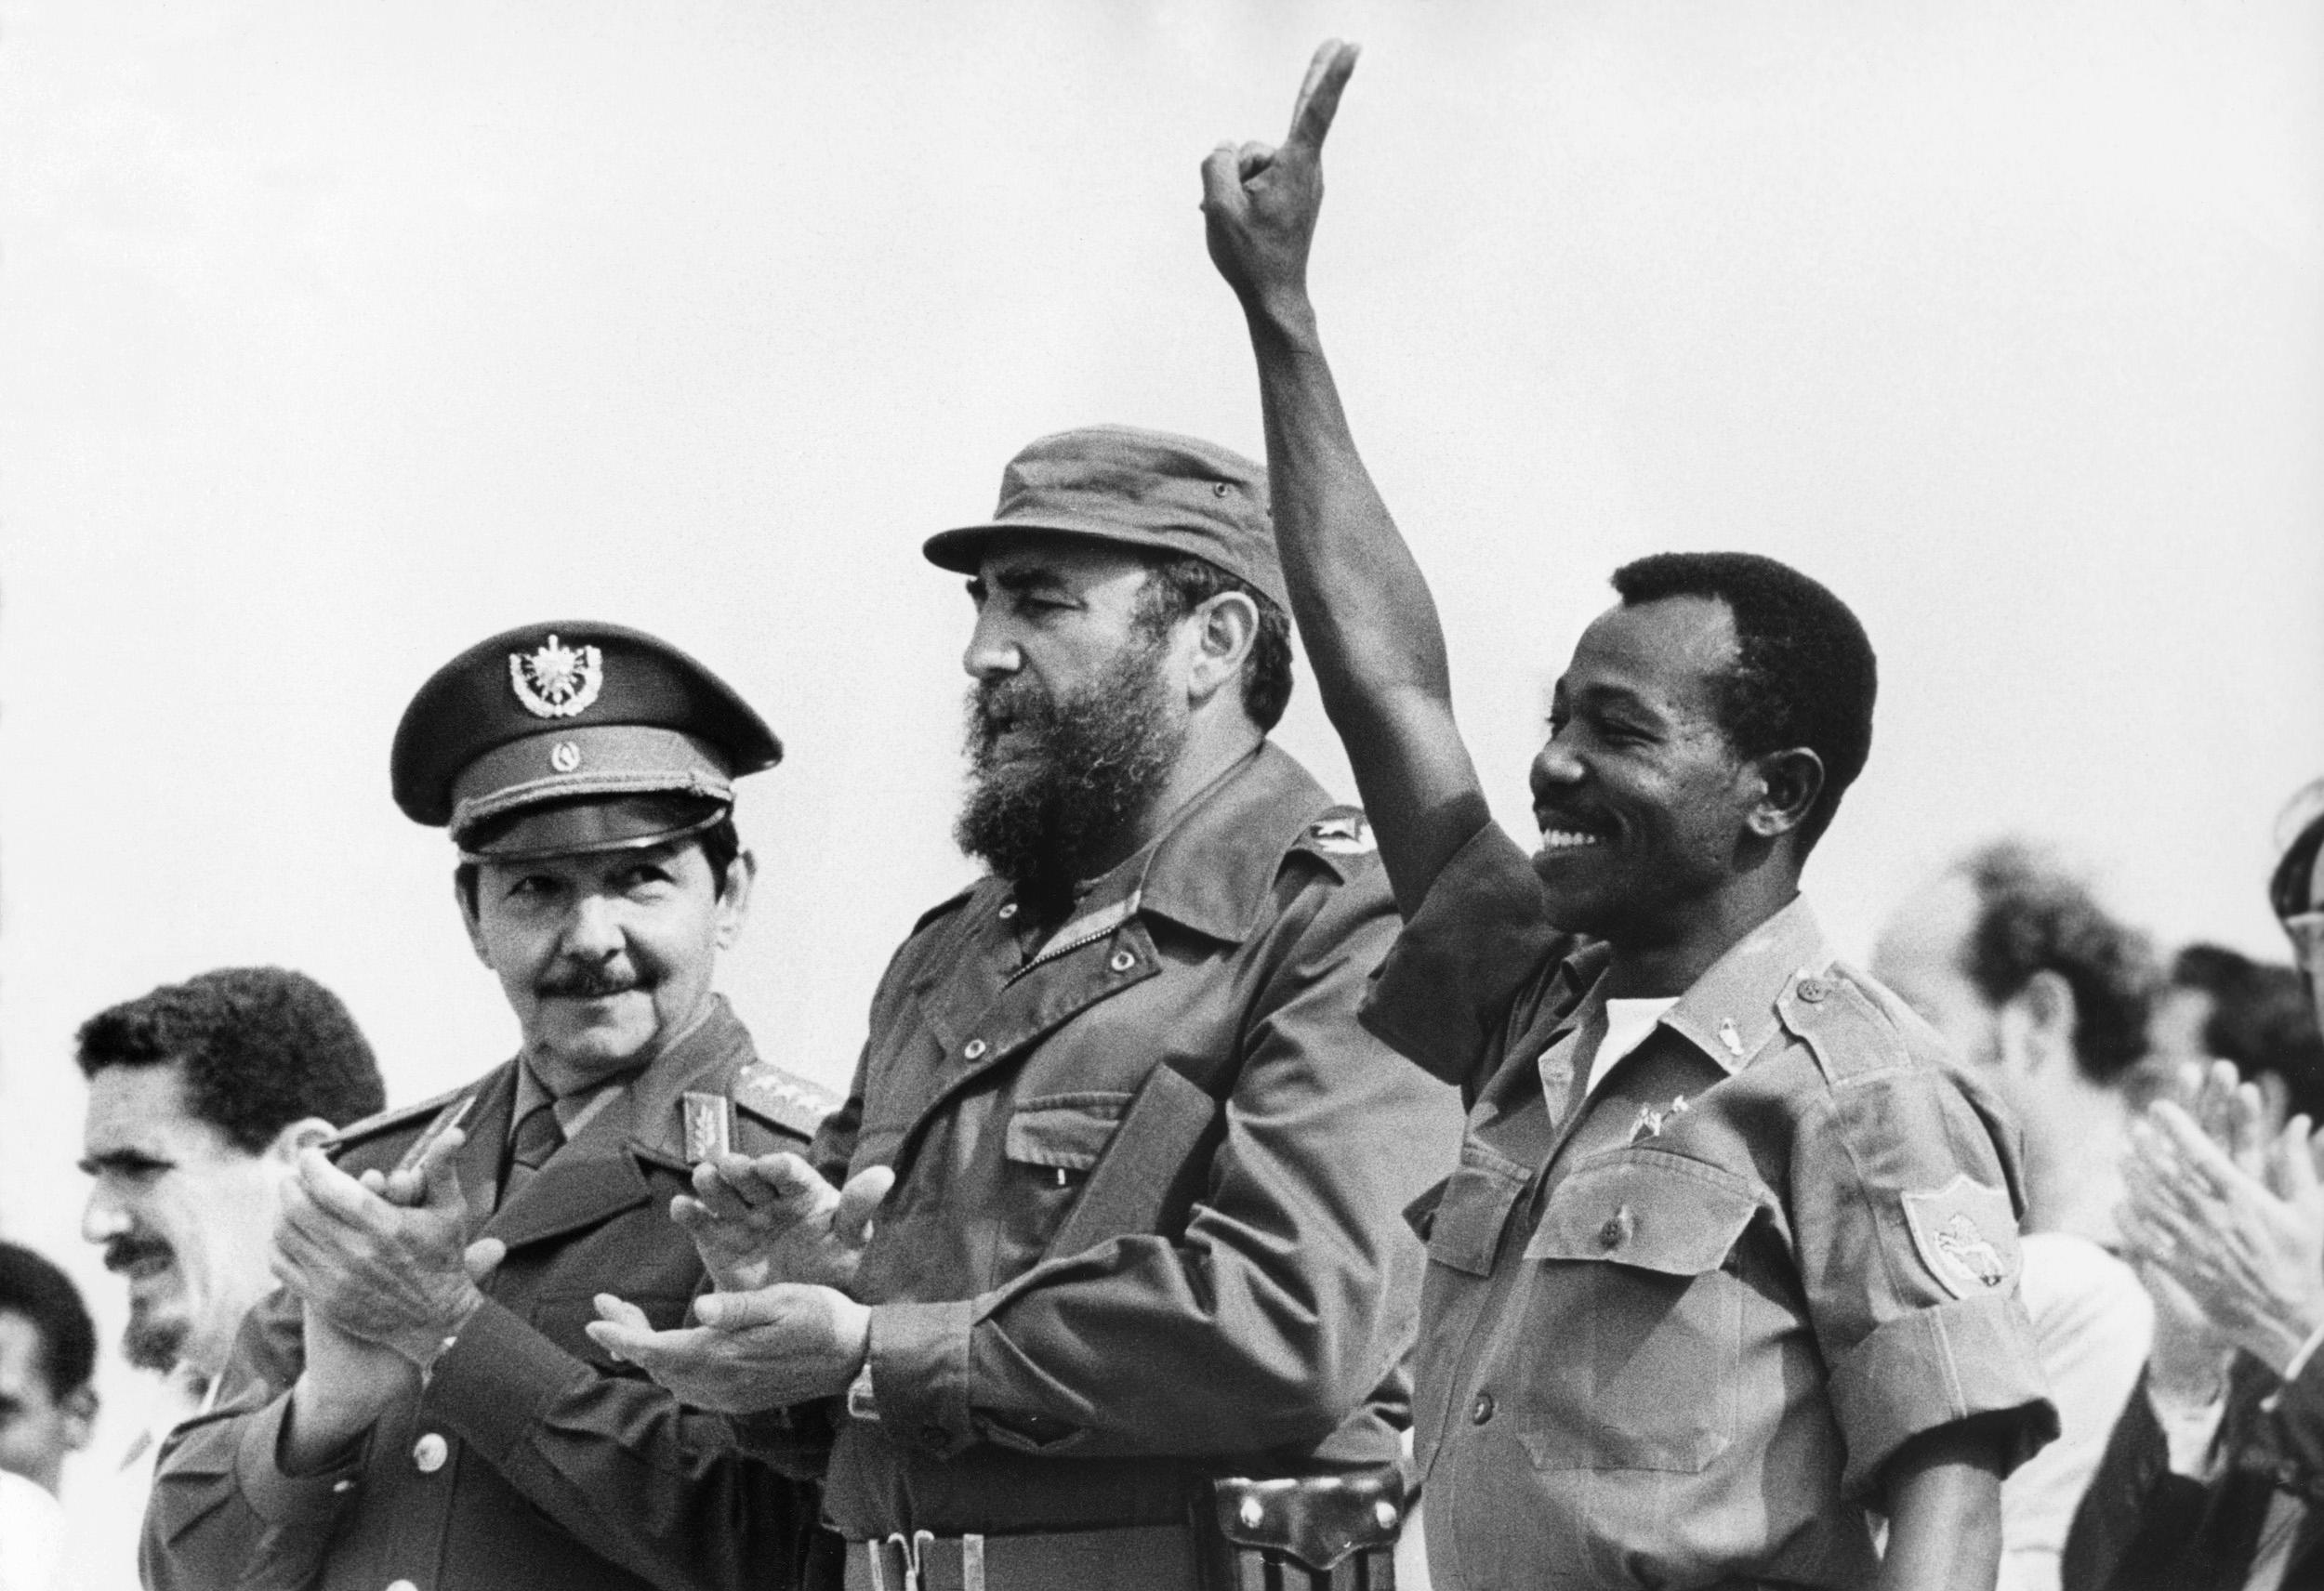 From left to right, Raul Castro, Fidel Castro, and Mengistu Haile Mariam celebrate their victory in the Ogaden War in Havana, Cuba in 1978. Somalia had invaded Ethiopia over disputed territory and was winning the war when the Soviets and Cuba intervened militarily in support of Mengistu and his Ethipian communist regime. Ethiopia and Somalia each lost over 6,000 dead, but Cuban troops were heavily engaged and lost 400 of their own soldiers. It is believed up to 18,000 Cuban soldiers helped repel the invading Somalian forces. This is one of the only times Cuba ever militarily involved itself in a conflict not in Central or South America.